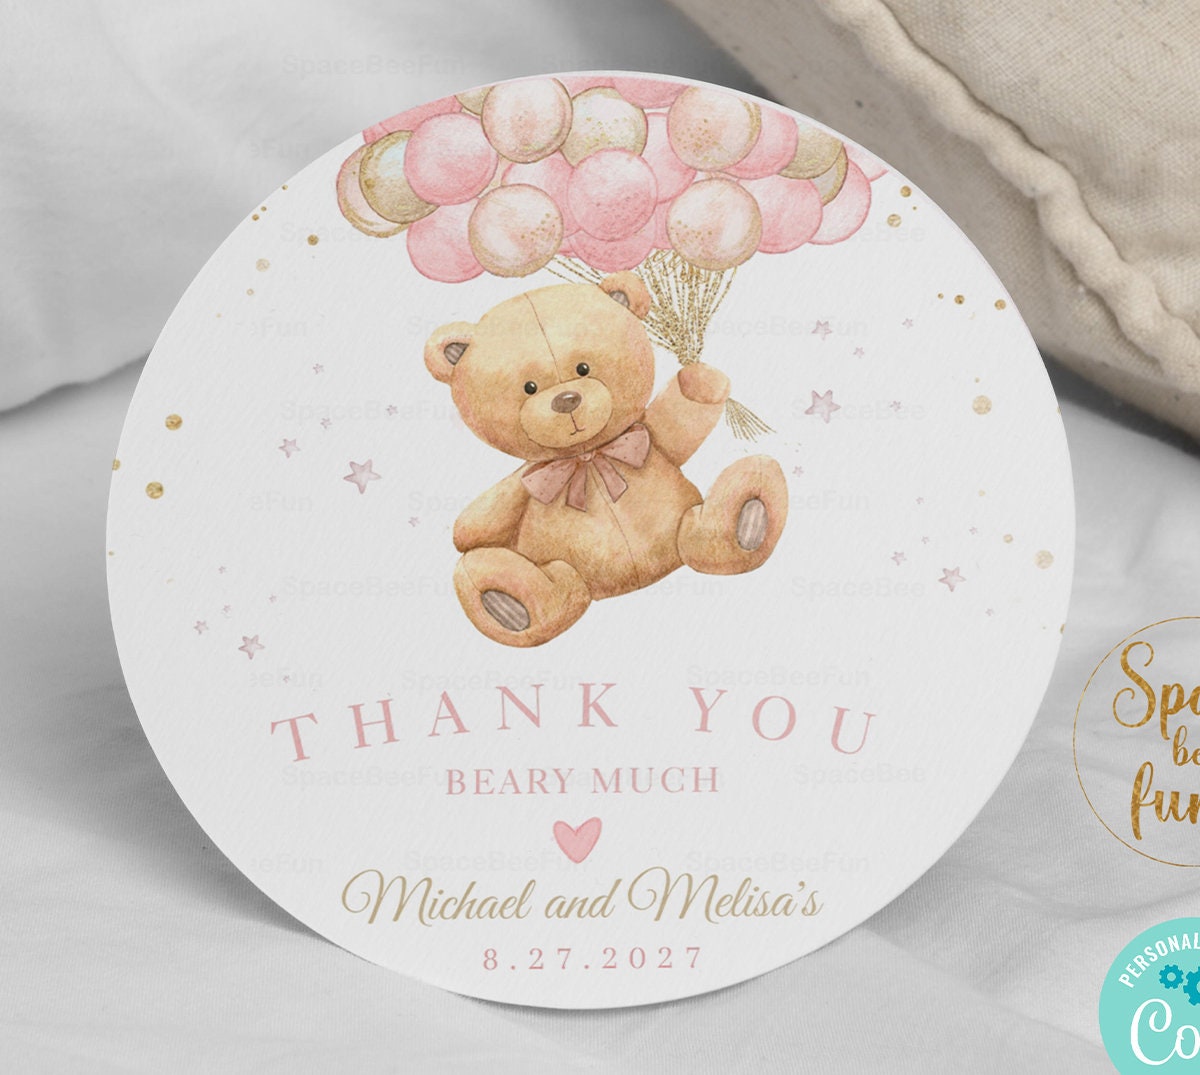 Large Teddy Bear Candle, Baby Shower Favor , Scented Bear Candle, Gender  Reveal Bear Gift, Soy Wax Candl, Centerpiece Topper Bear Candle 